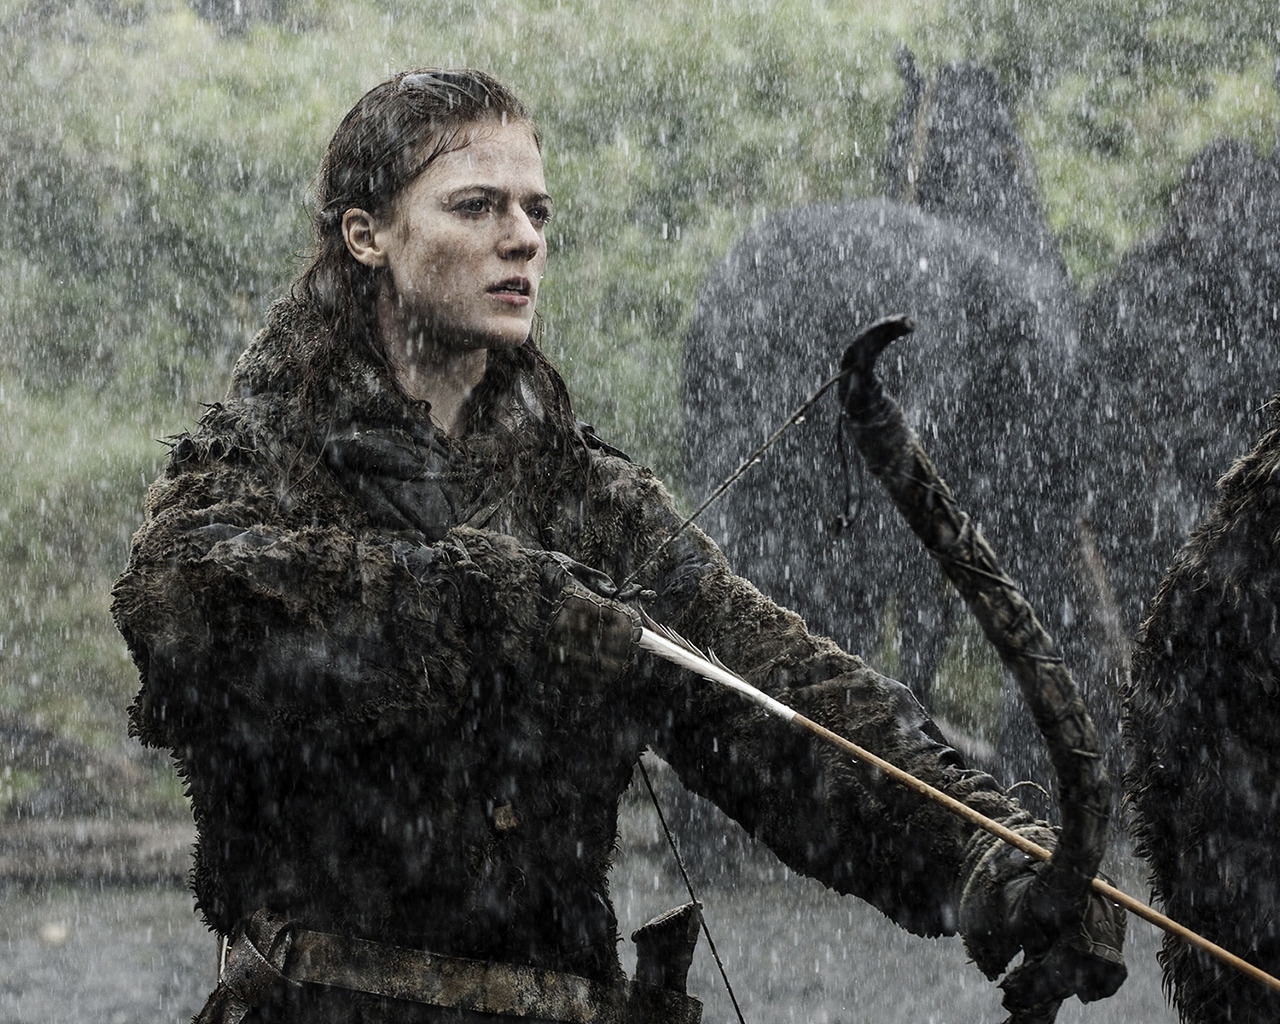 Ygritte from Game of Thrones for 1280 x 1024 resolution